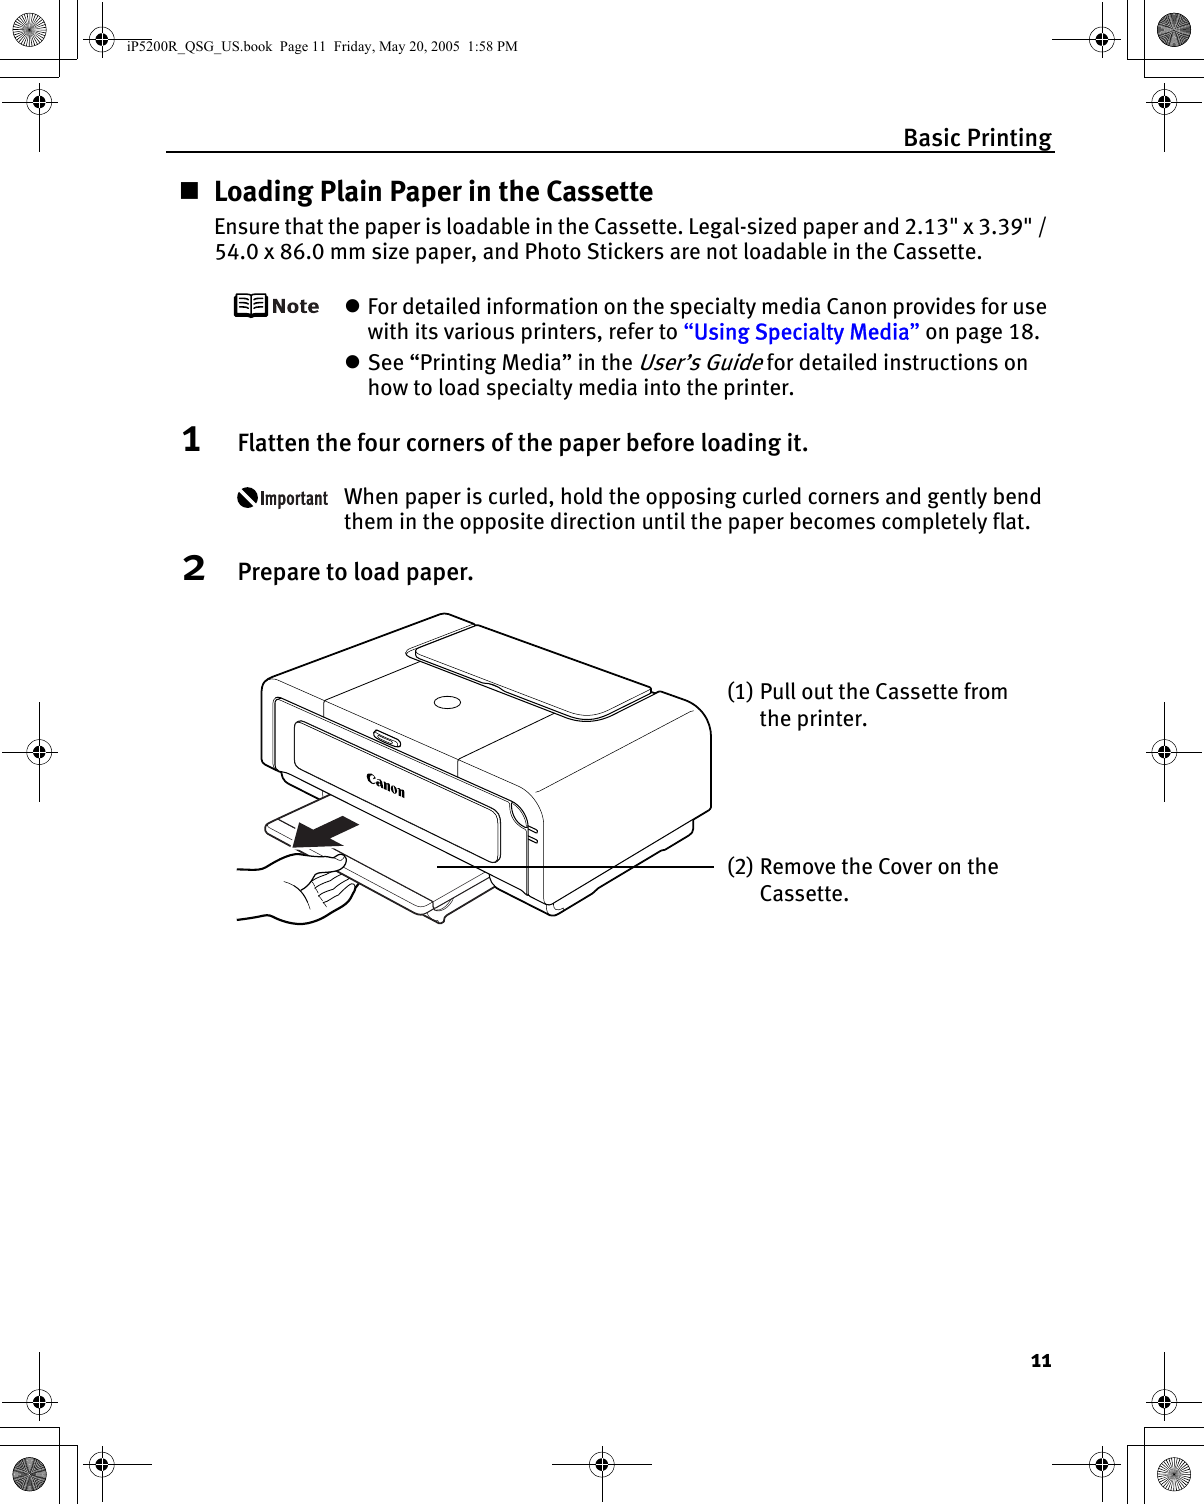 Basic Printing11Loading Plain Paper in the CassetteEnsure that the paper is loadable in the Cassette. Legal-sized paper and 2.13&quot; x 3.39&quot; / 54.0 x 86.0 mm size paper, and Photo Stickers are not loadable in the Cassette.zFor detailed information on the specialty media Canon provides for use with its various printers, refer to “Using Specialty Media” on page 18.zSee “Printing Media” in the User’s Guide for detailed instructions on how to load specialty media into the printer.1Flatten the four corners of the paper before loading it.When paper is curled, hold the opposing curled corners and gently bend them in the opposite direction until the paper becomes completely flat.2Prepare to load paper.(1) Pull out the Cassette from the printer.(2) Remove the Cover on the Cassette.iP5200R_QSG_US.book  Page 11  Friday, May 20, 2005  1:58 PM